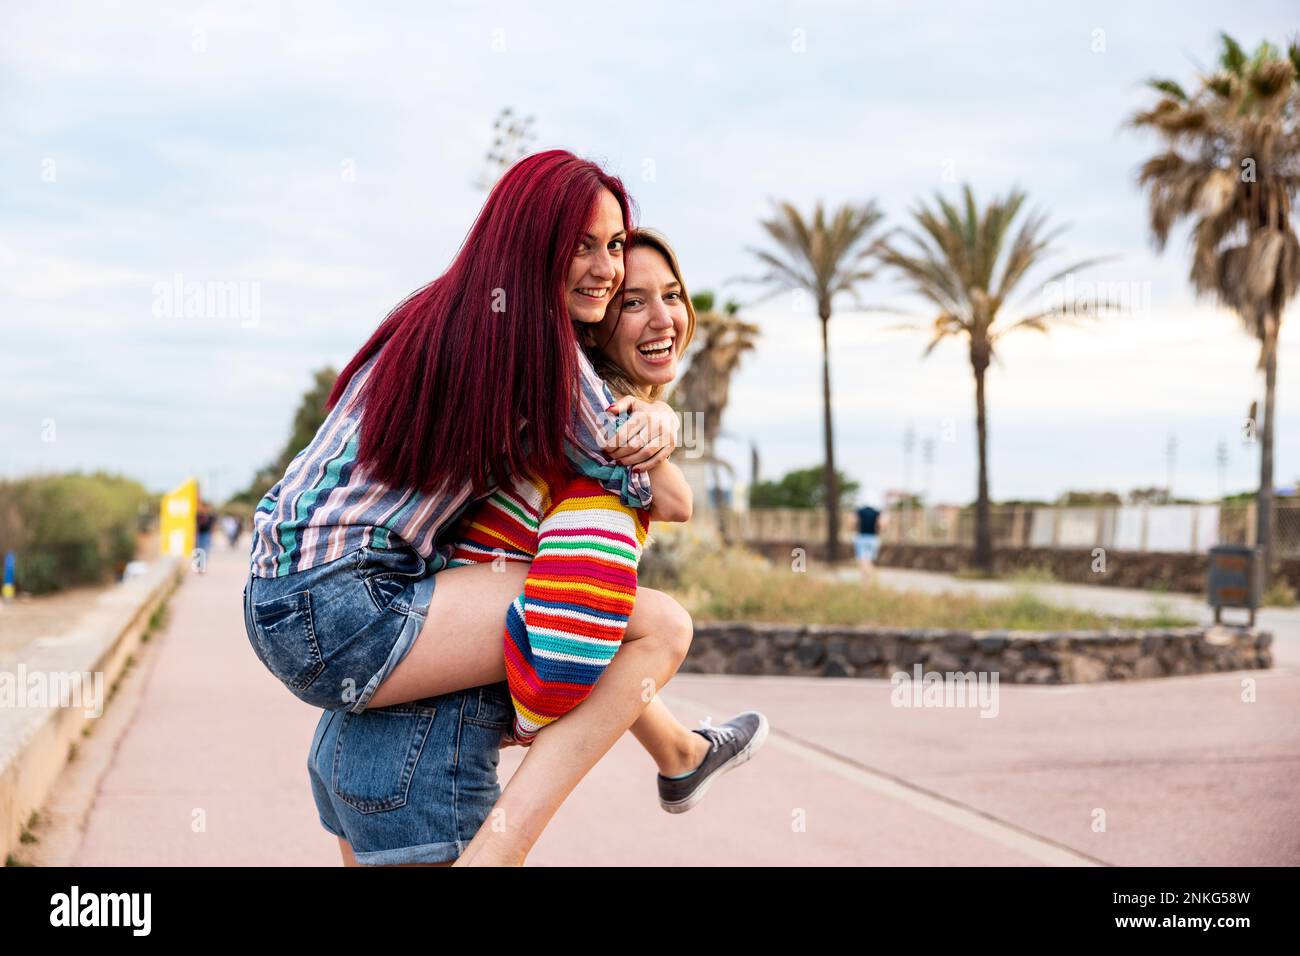 Happy woman giving piggy back ride to friend at promenade Stock Photo